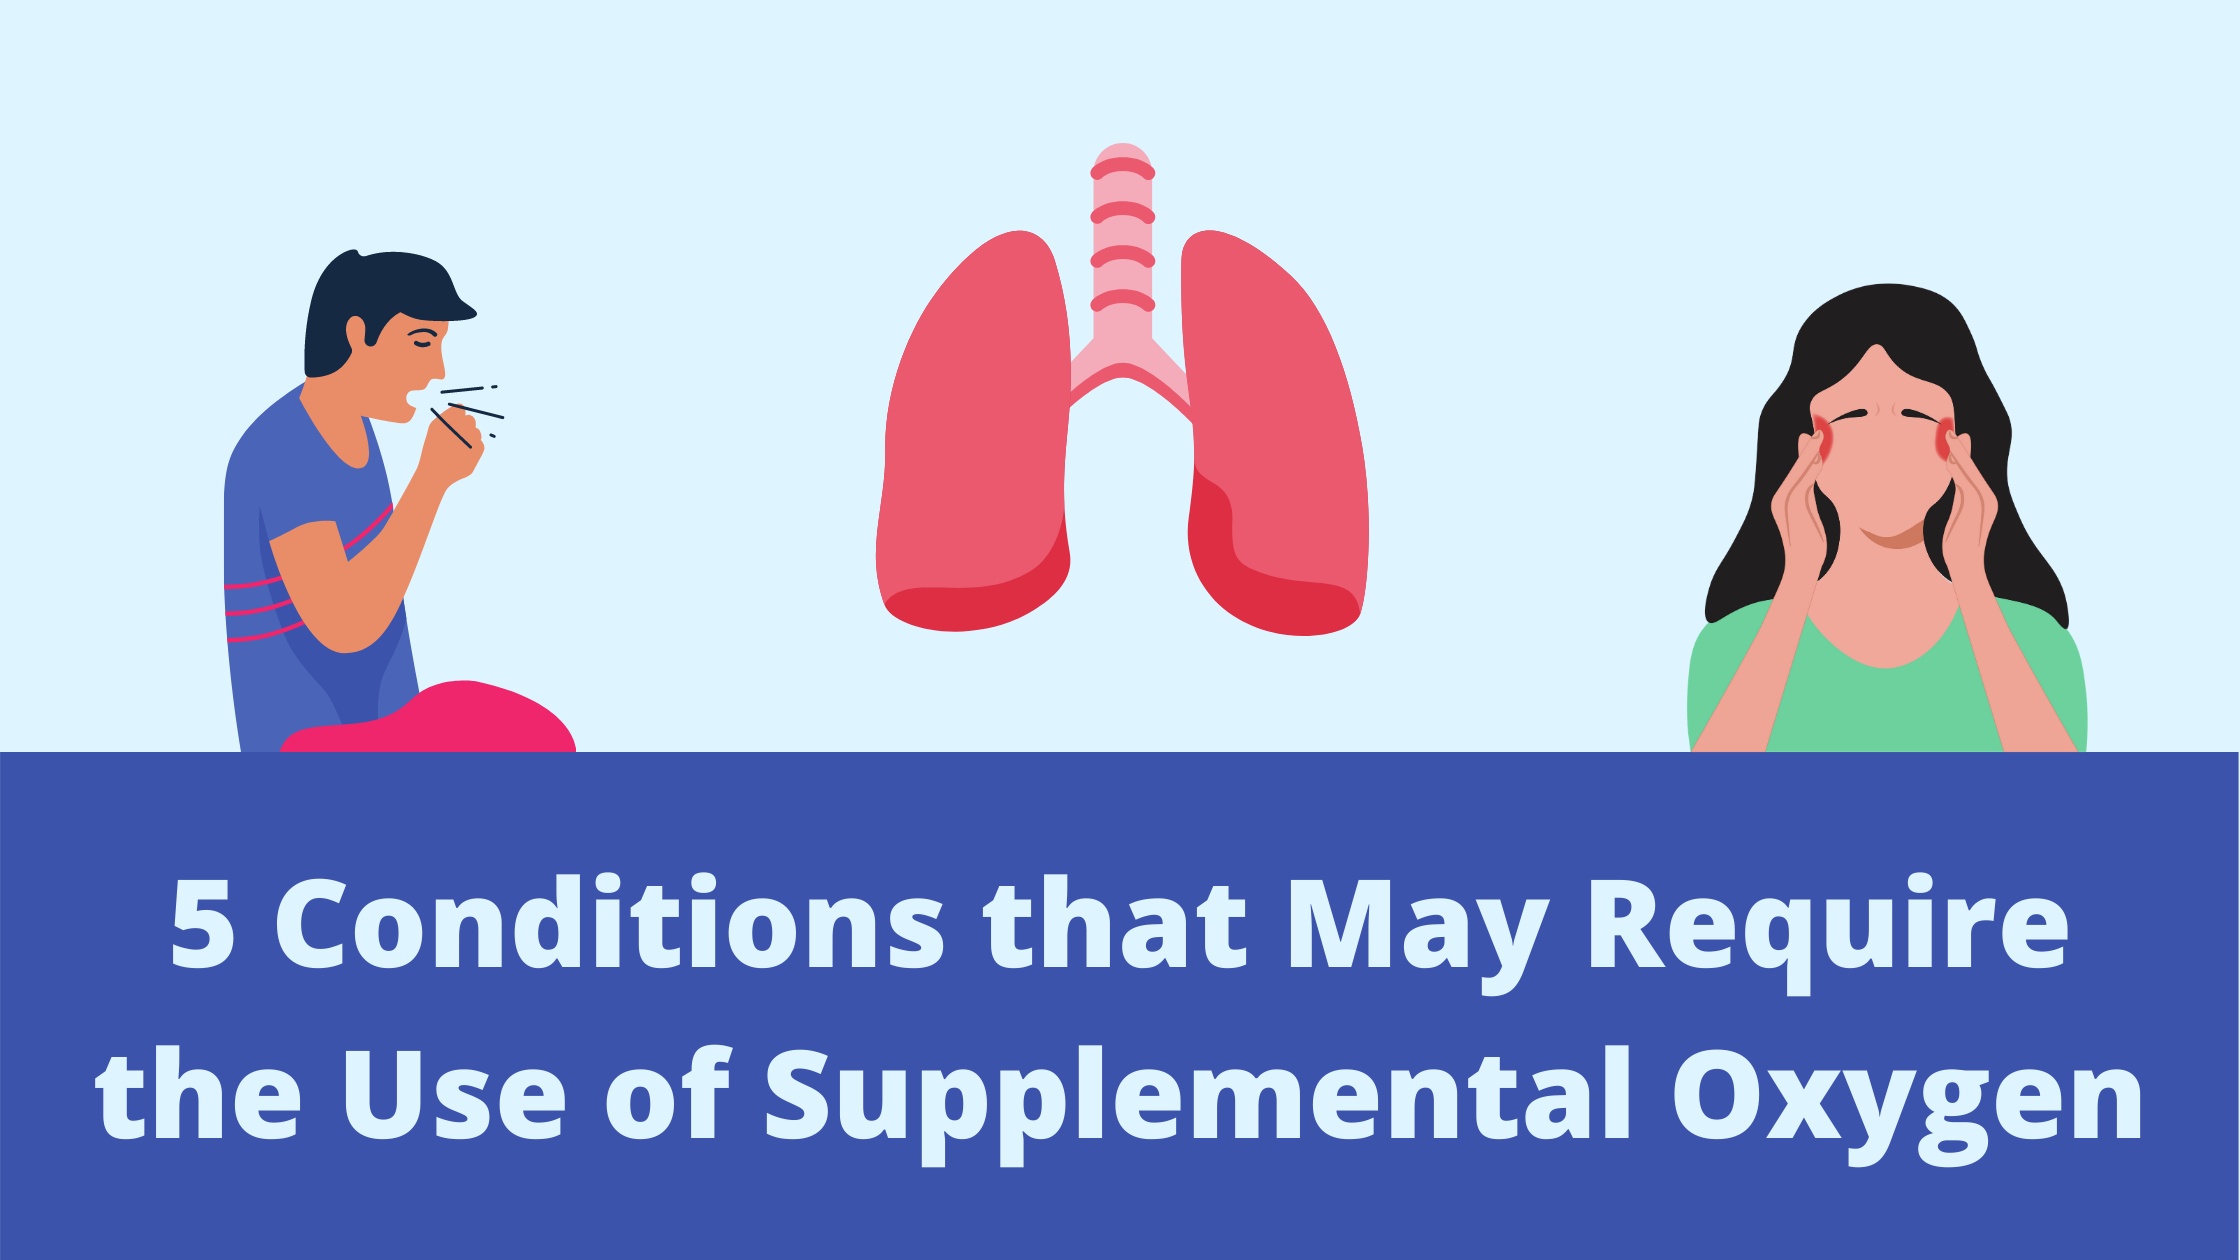 5 conditions that may require the use of supplemental oxygen